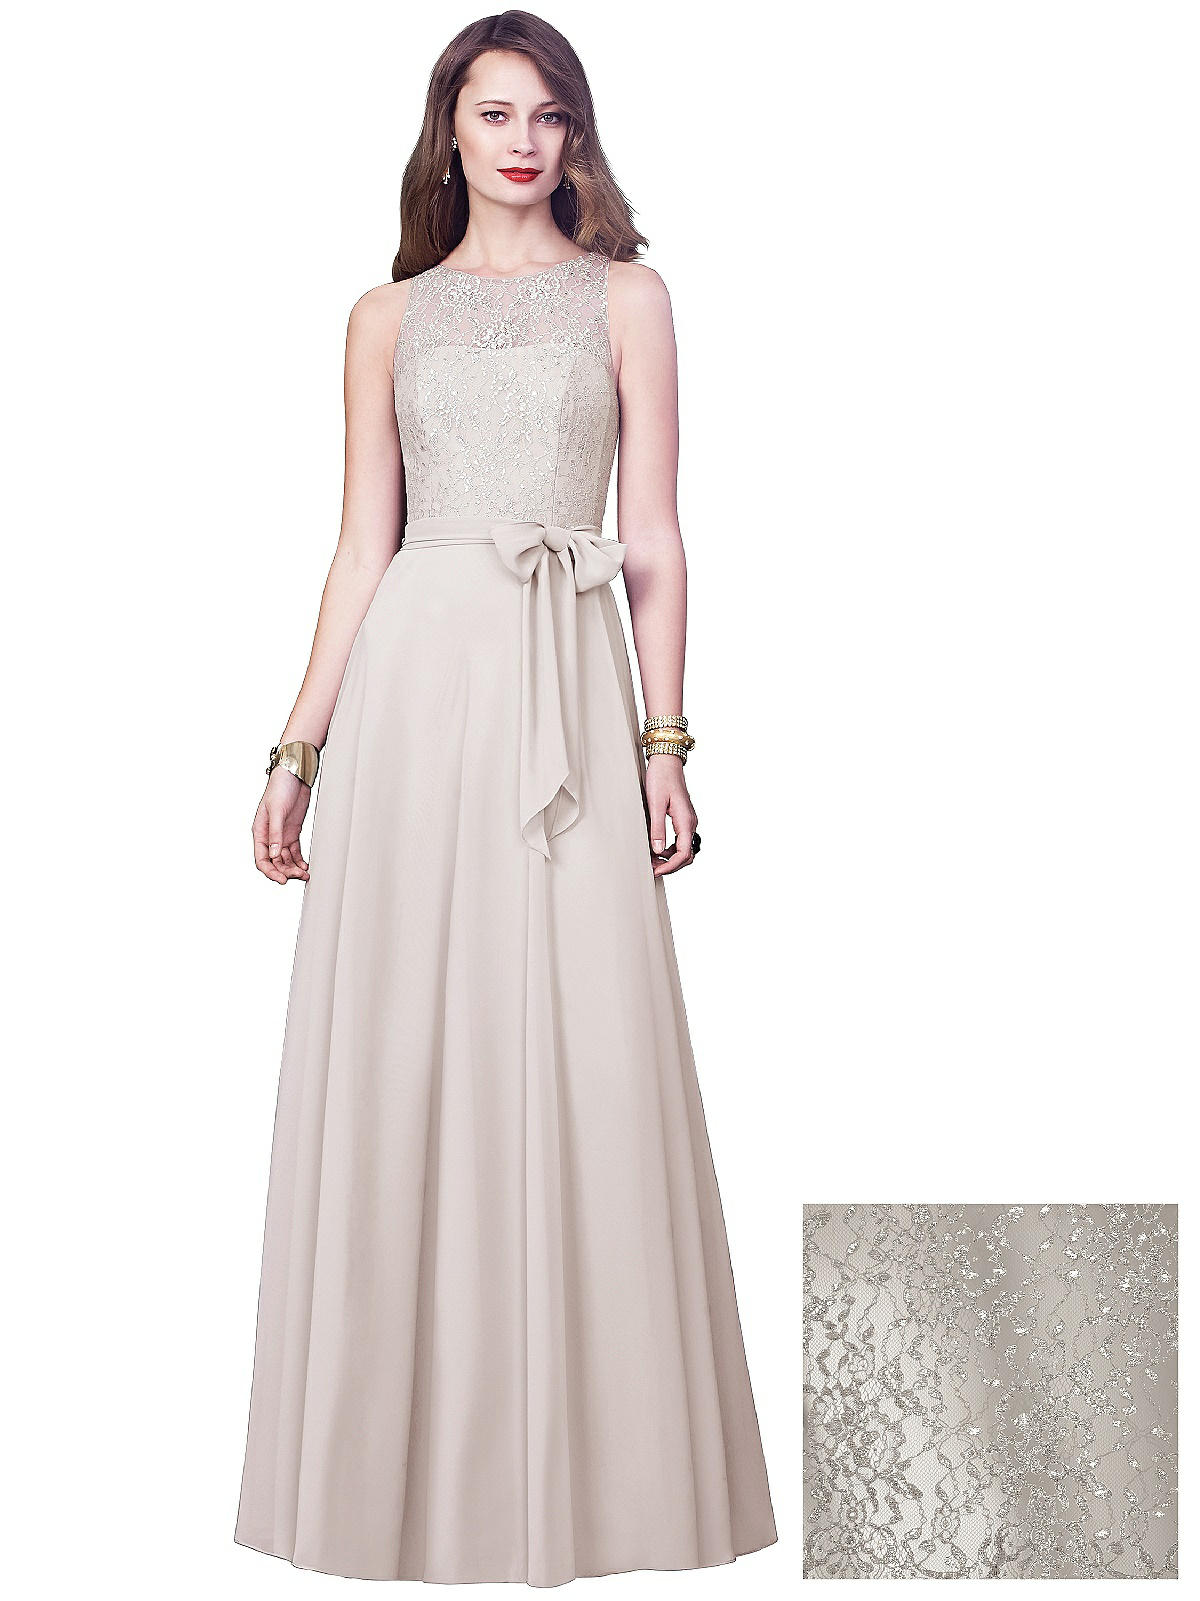 Dessy Collection Style 2924 | The Dessy Group